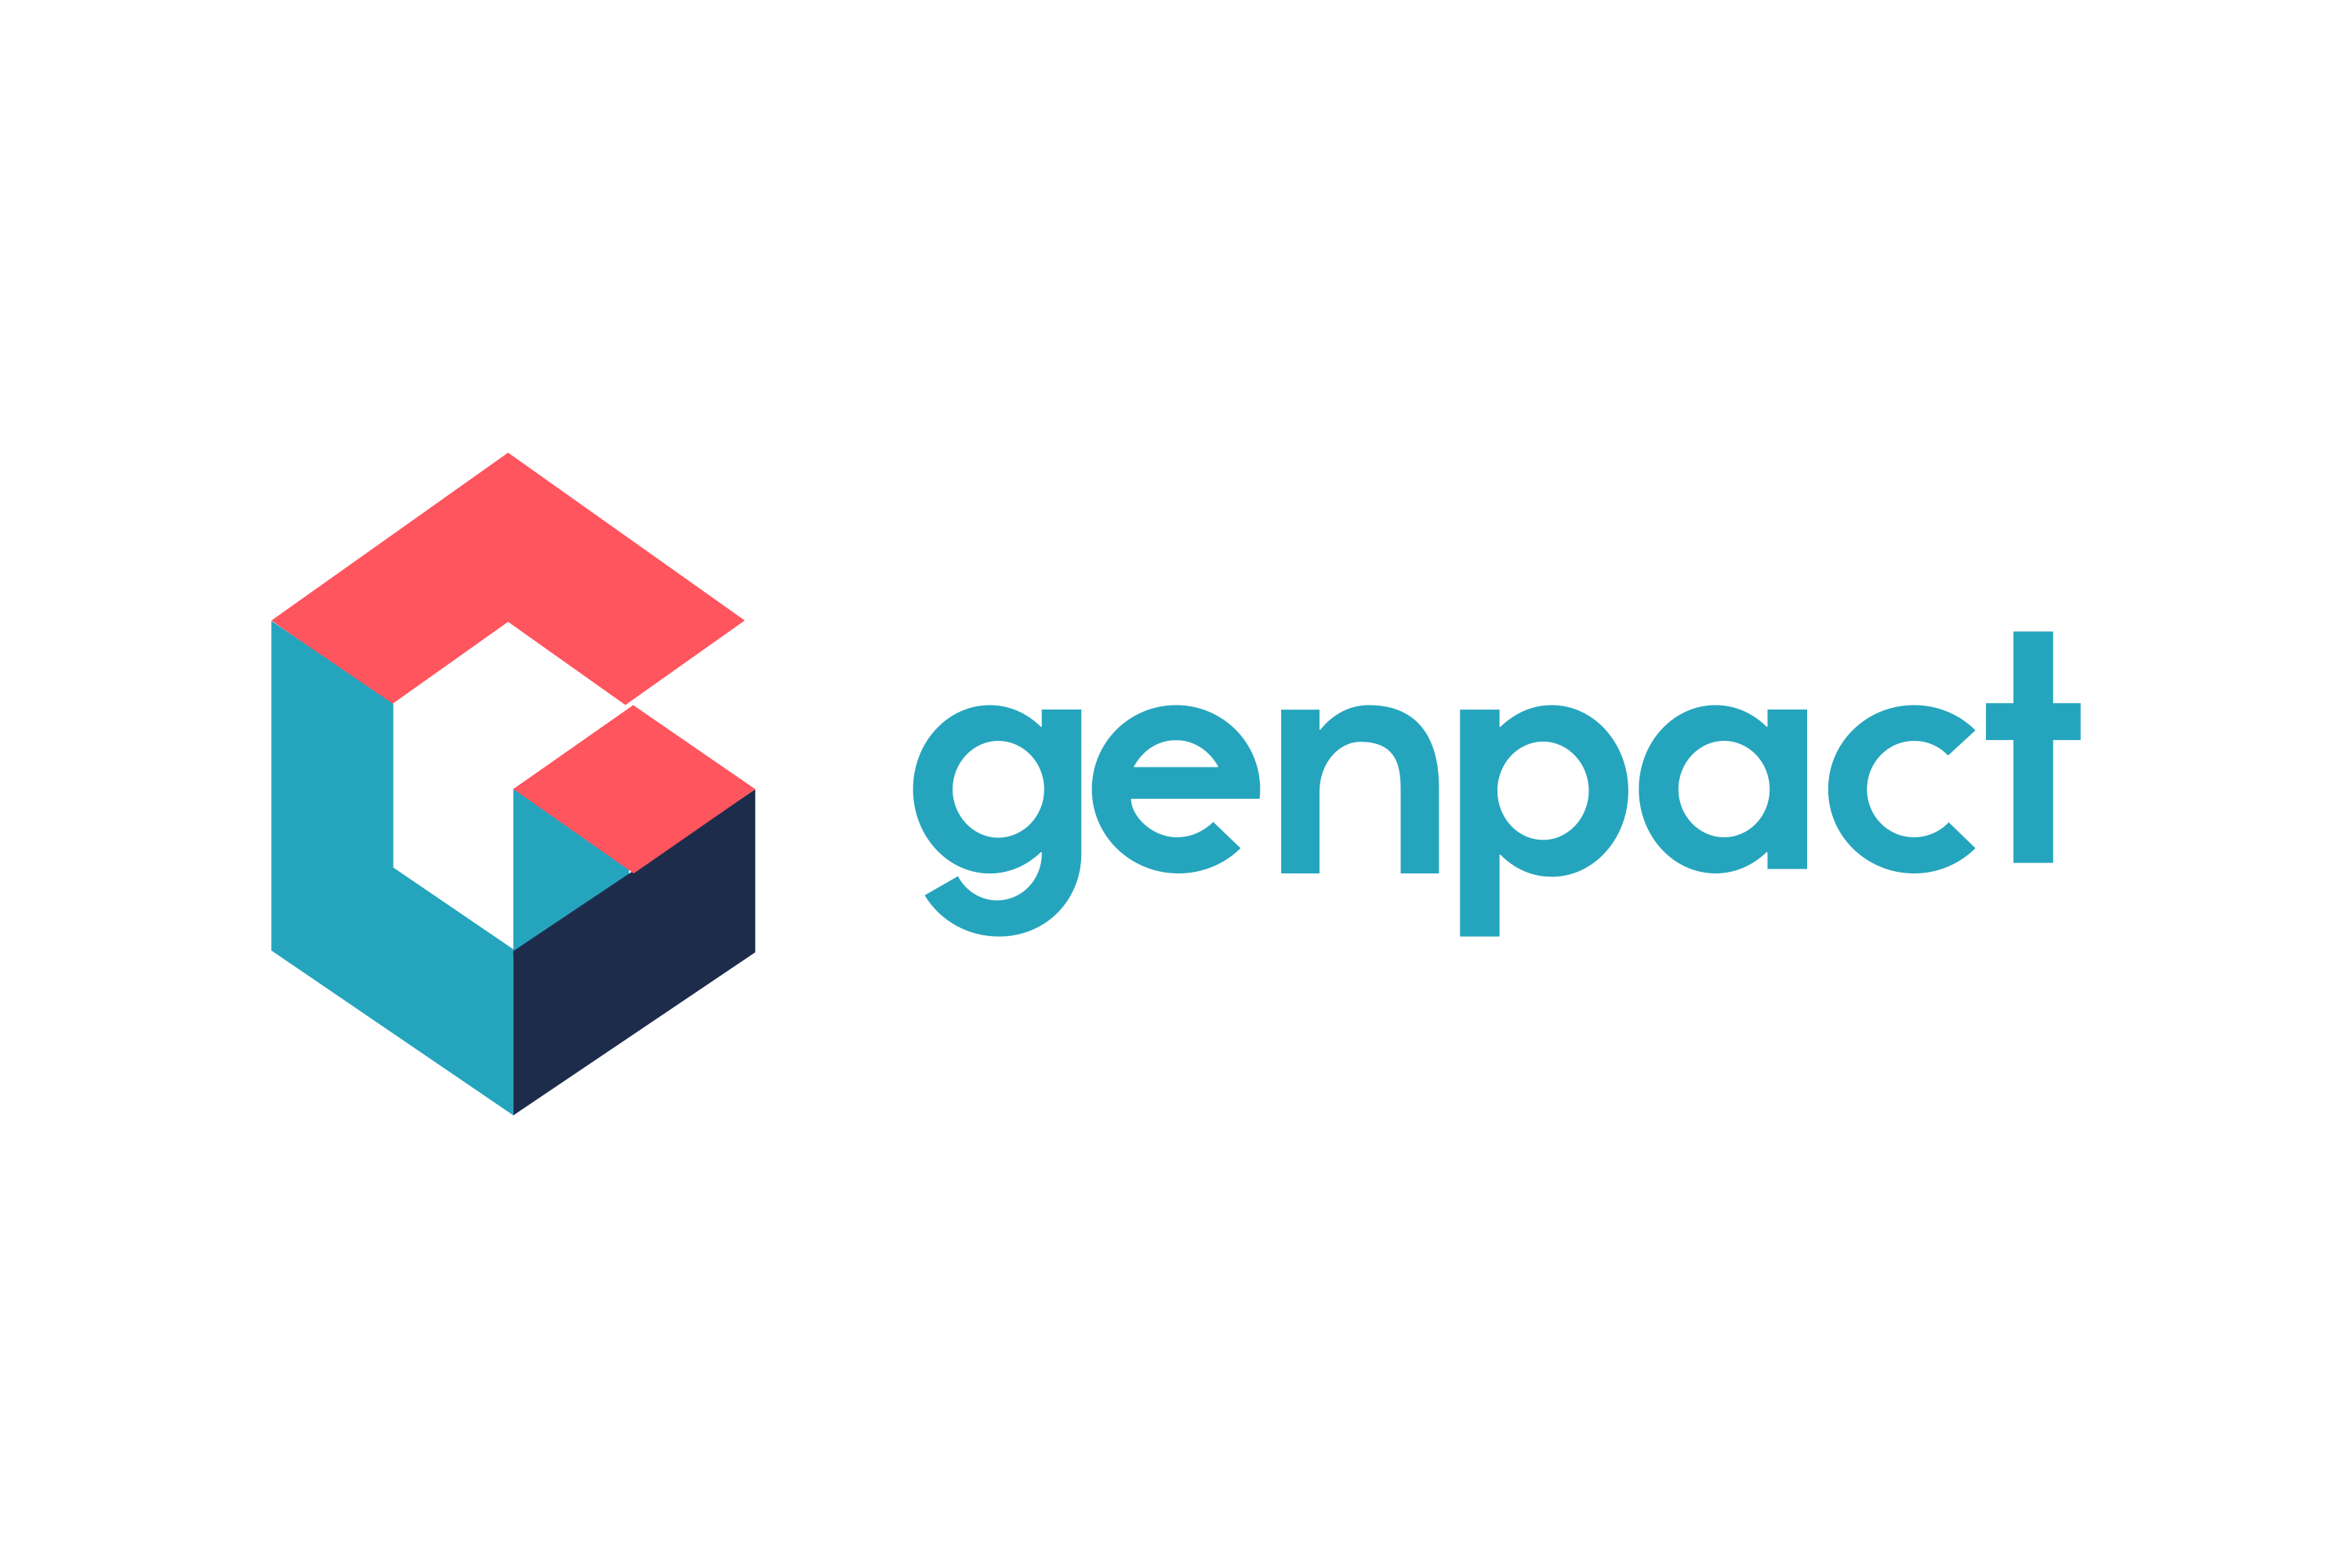 Genpact Freshers Jobs role As Management trainee | 2022